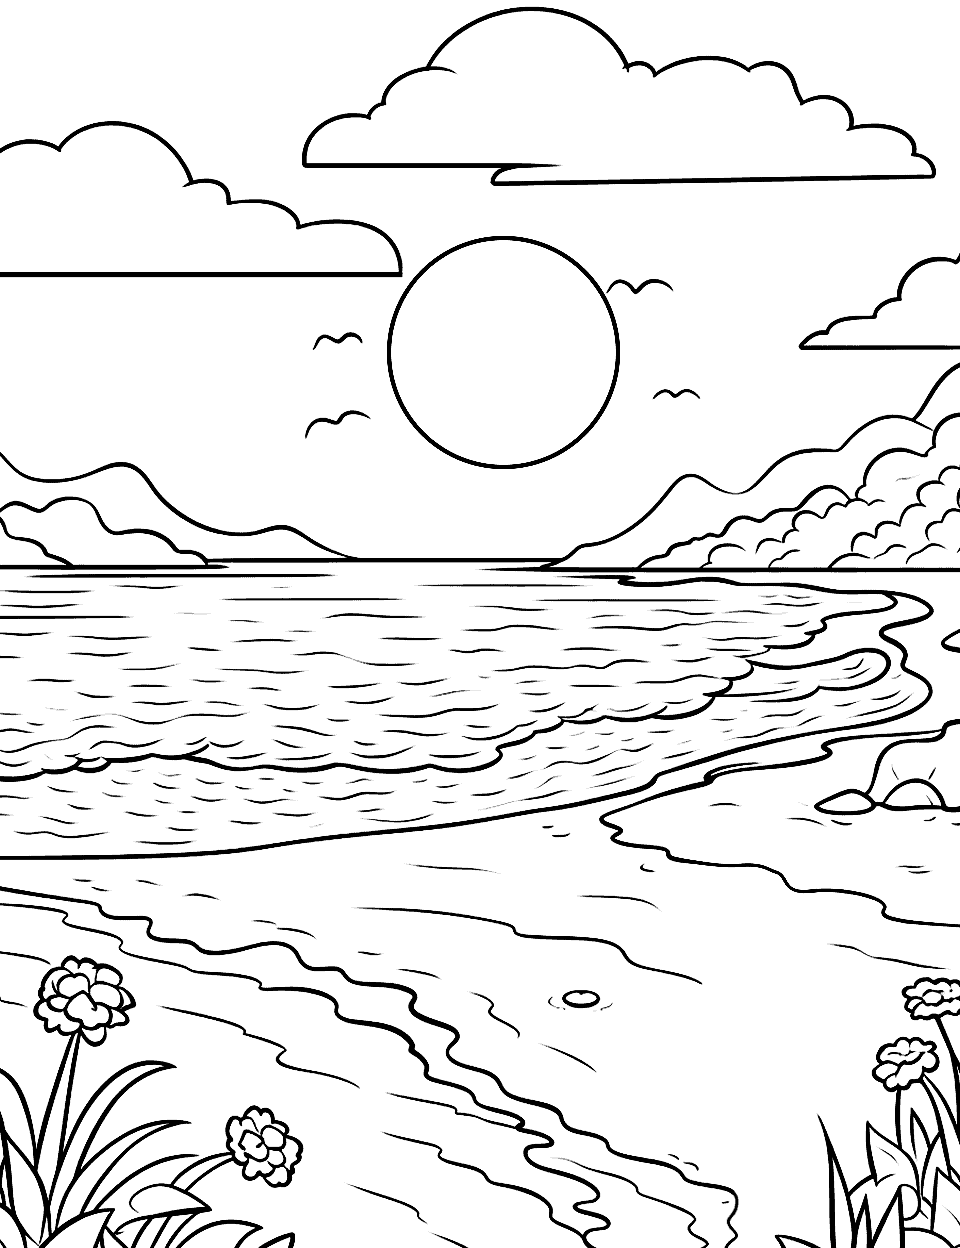 Summer Sea Beach Day Coloring Page - A sunny beach scene with waves gently lapping at the sandy shore.